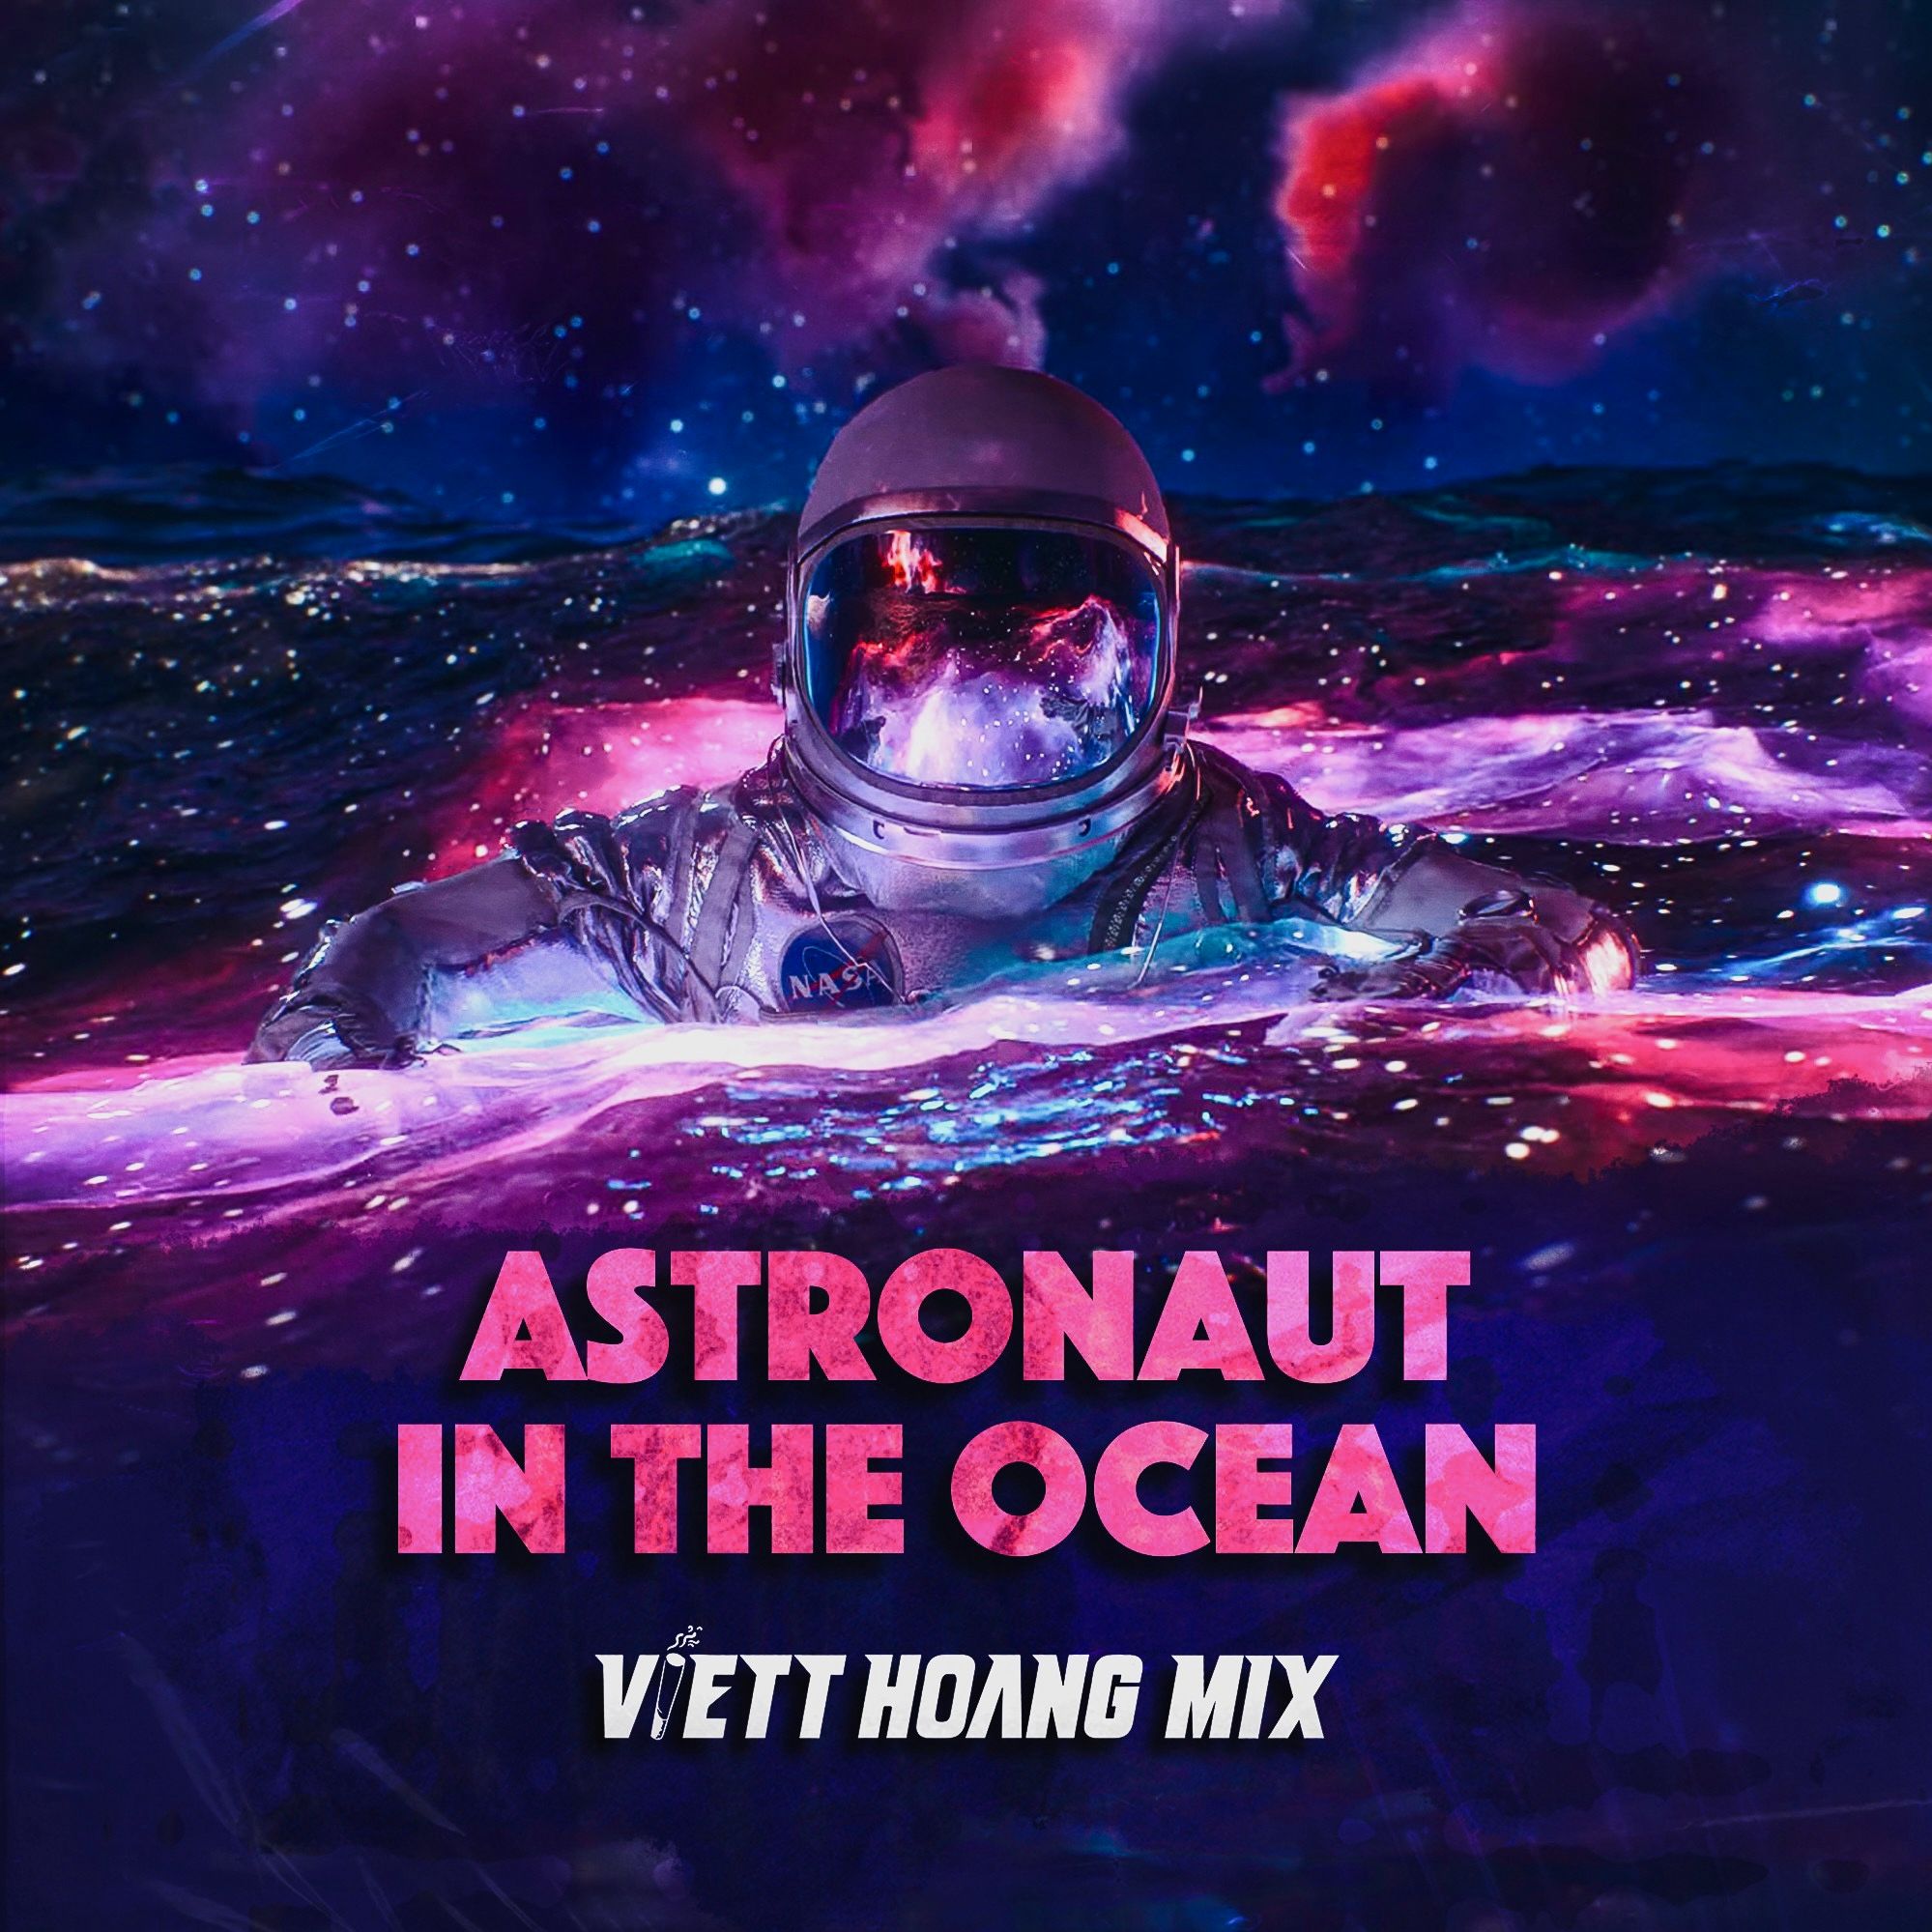 Download MASKED WOLF - Astronaut in the Ocean - VIETTHOANG MIX